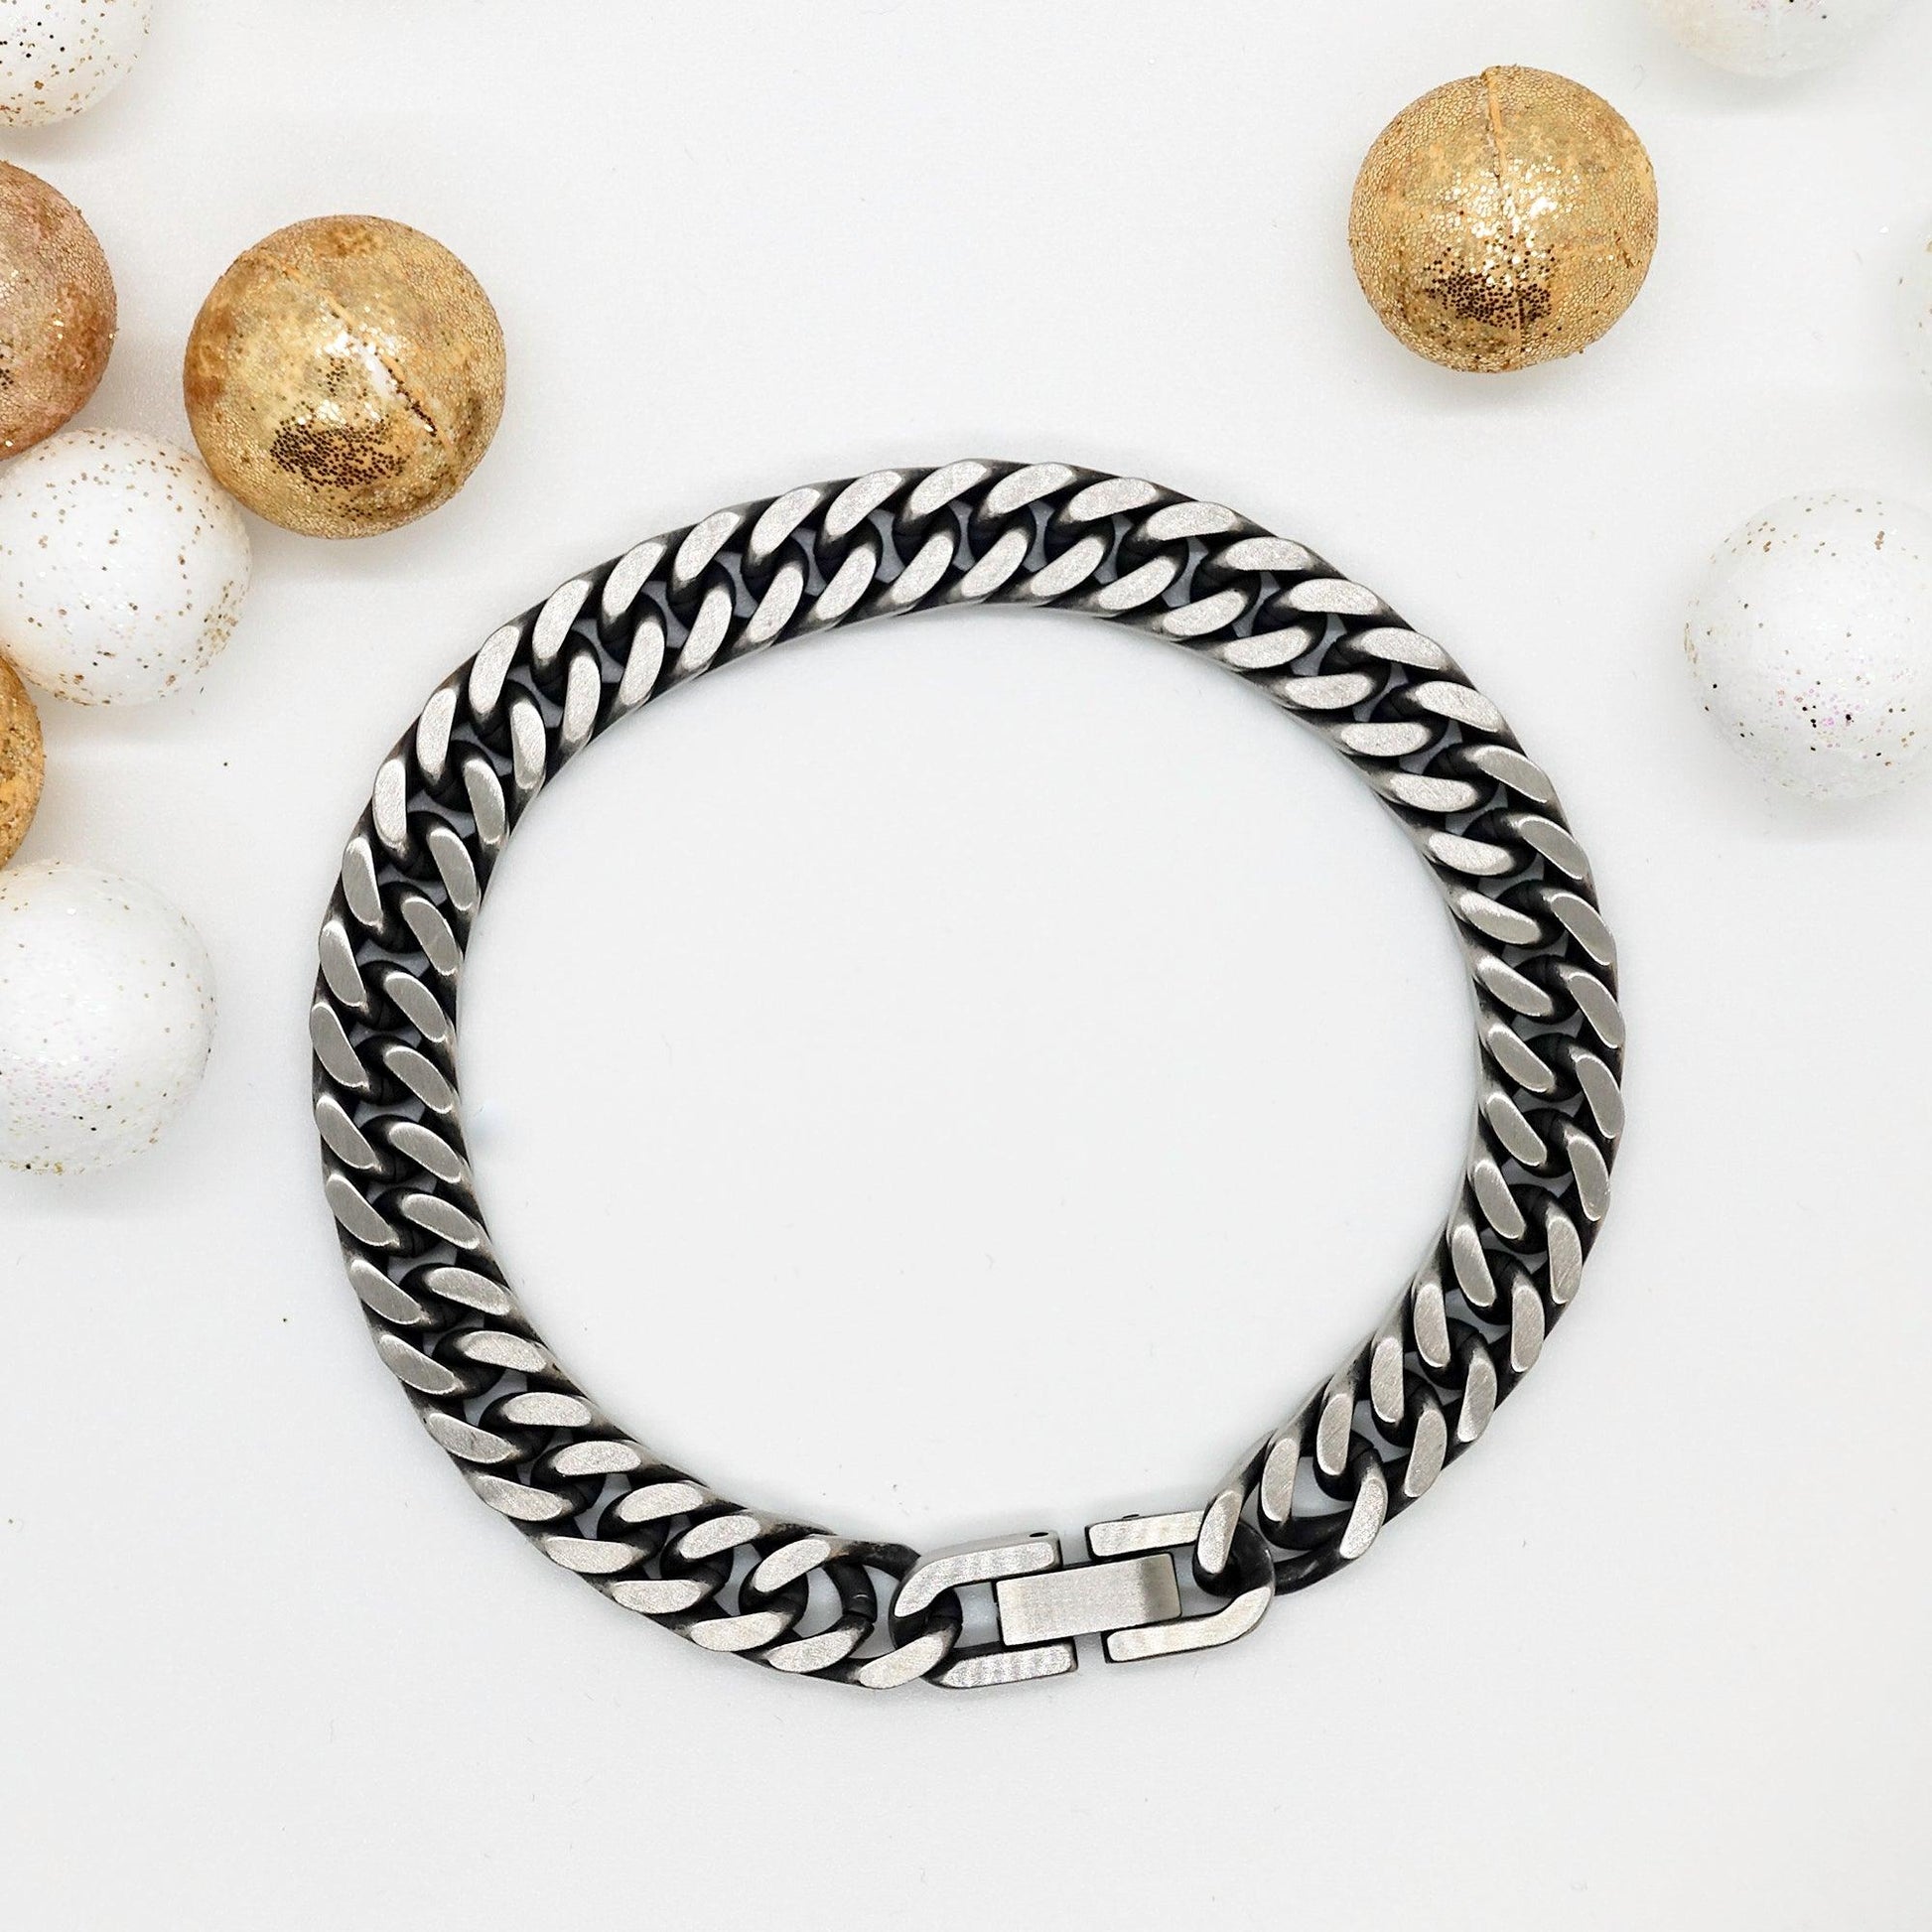 Remarkable Mixologist Gifts, Your dedication and hard work, Inspirational Birthday Christmas Unique Cuban Link Chain Bracelet For Mixologist, Coworkers, Men, Women, Friends - Mallard Moon Gift Shop